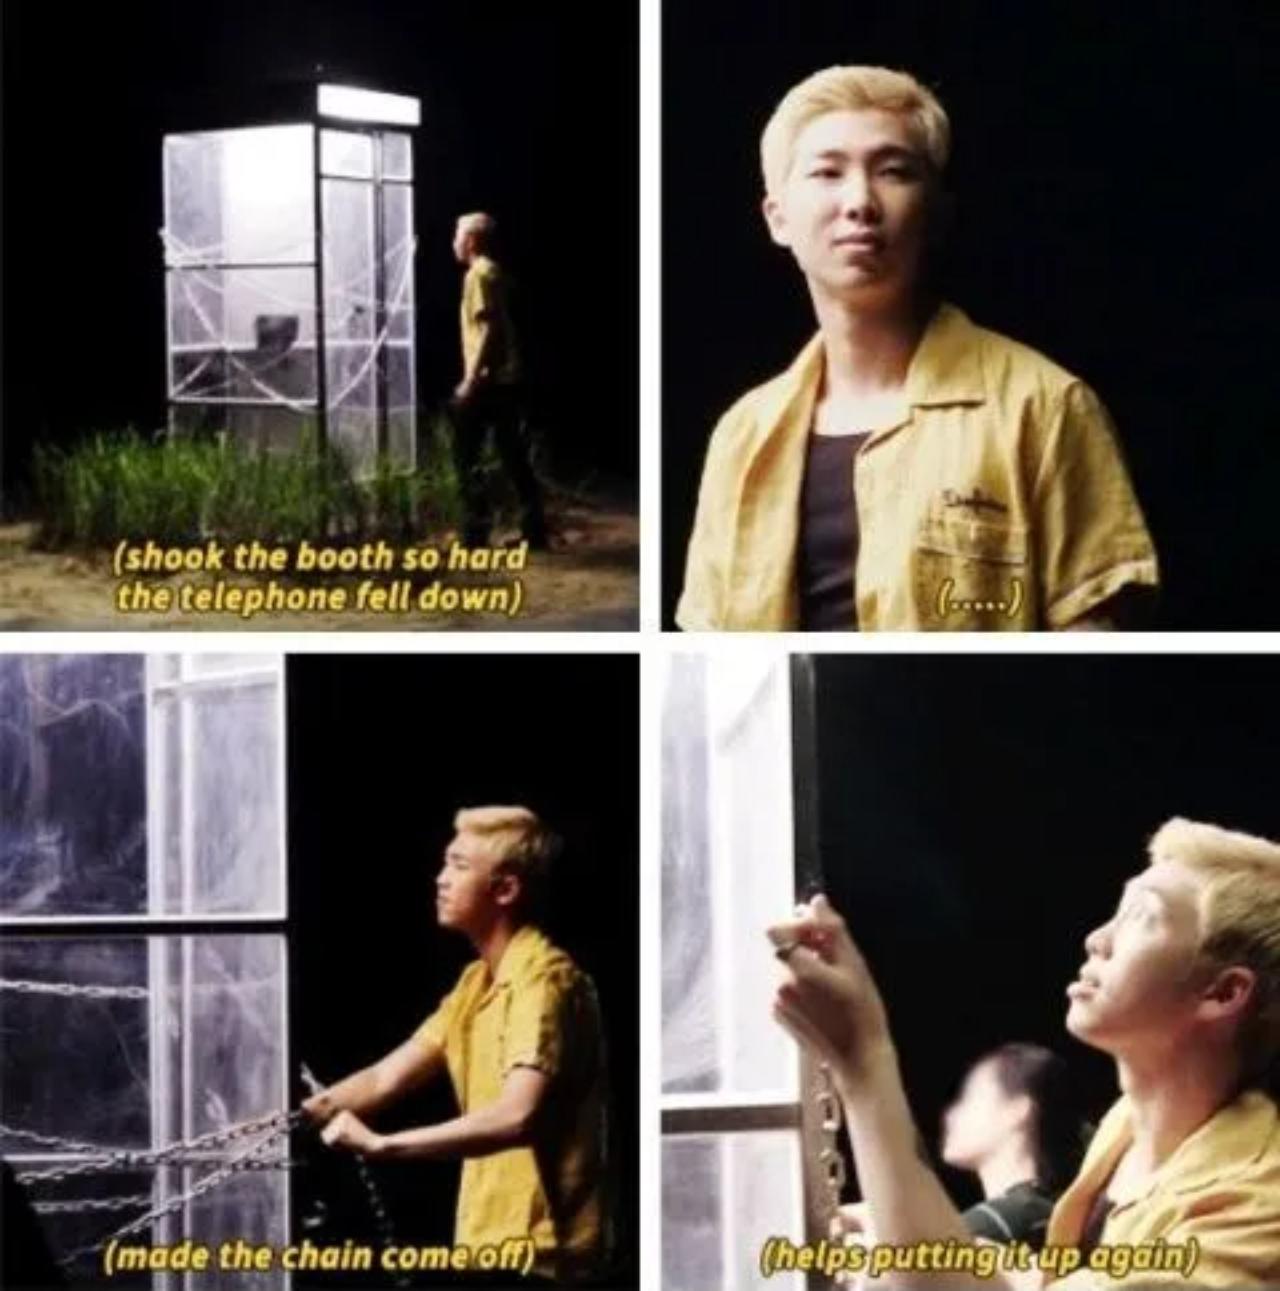 While shooting for a music video, Namjoon was supposed to slam into the phone booth in mock frustration. However, he ended up doing it with such vigour that the phone prop positioned inside fell to the floor - and he ended up unravelling the chain